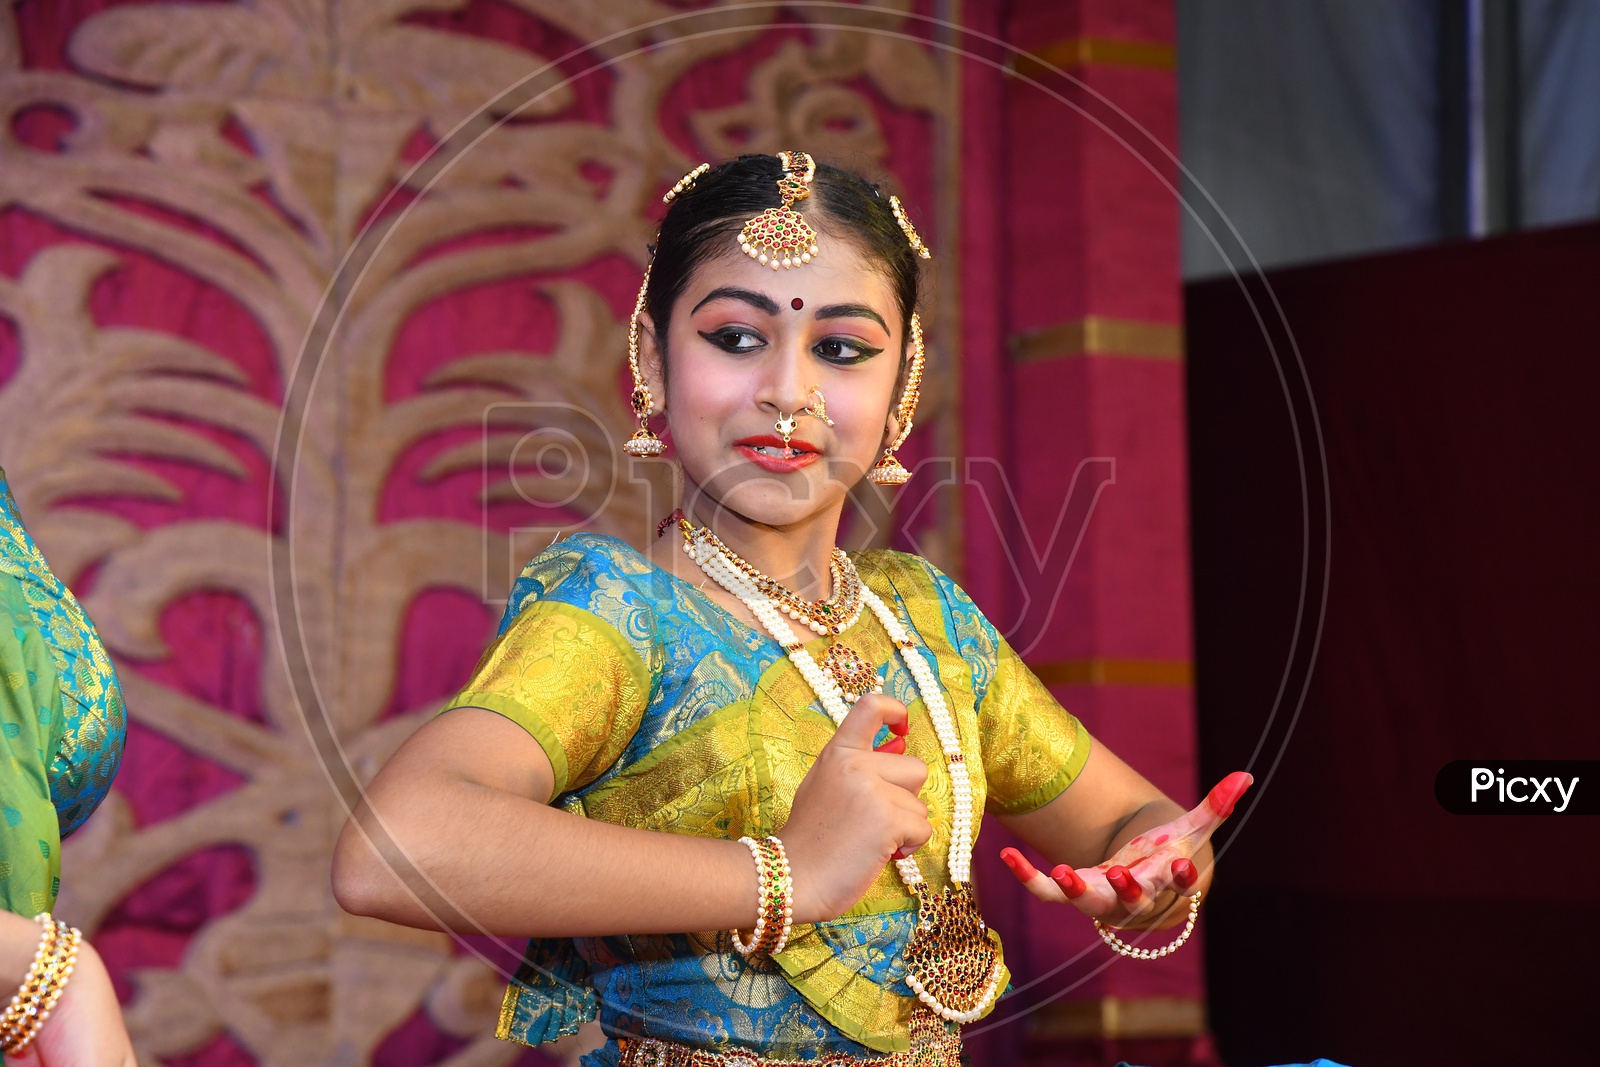 Indian dancer girl in the middle of her performance during Dussehra